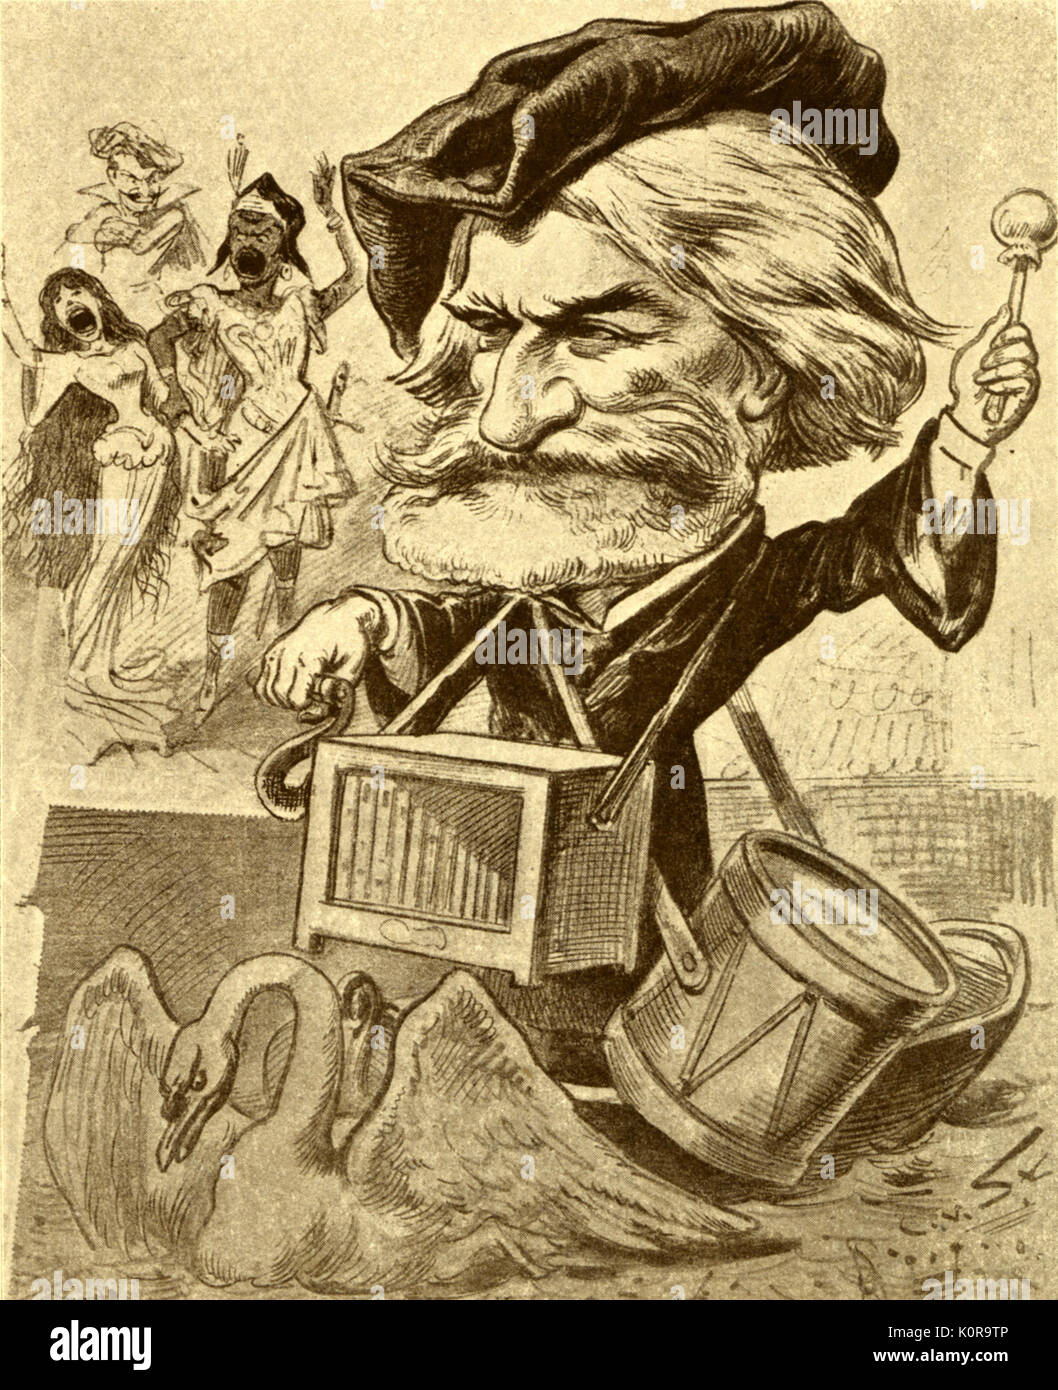 Giuseppe Verdi banging his drum, implying he is influenced by Wagner, (note Lohengrin swan at his feet). By E von Stur in the 'Floh' (the Flea).  Italian composer (1813-1901). Stock Photo